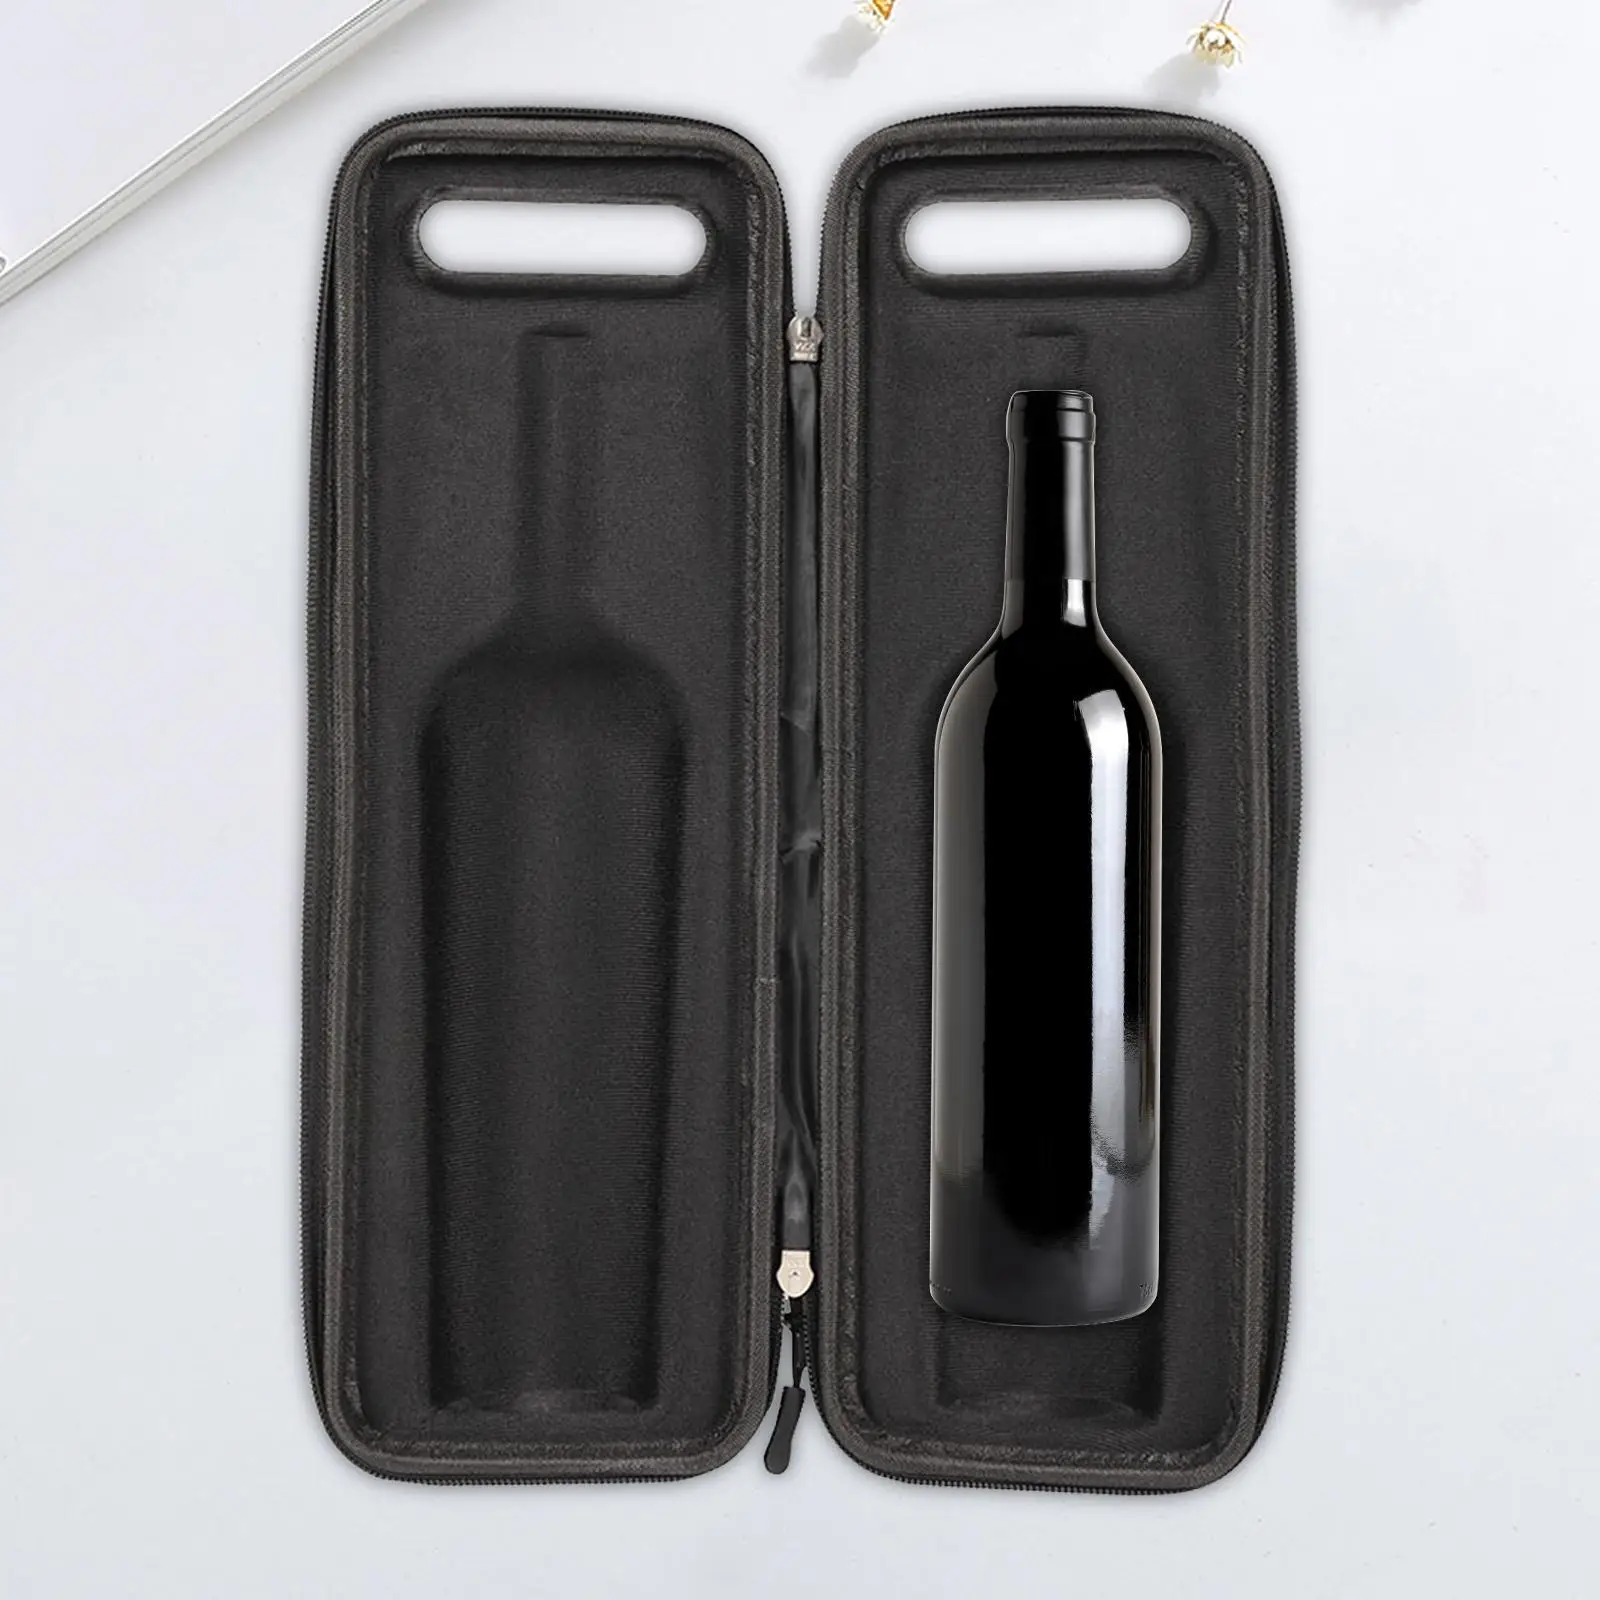 Single Bottle Wine Carrier Gift Party Packing Box with Zipper with Handle Picnic EVA Hard Case Organizer Wine Lovers Men Women